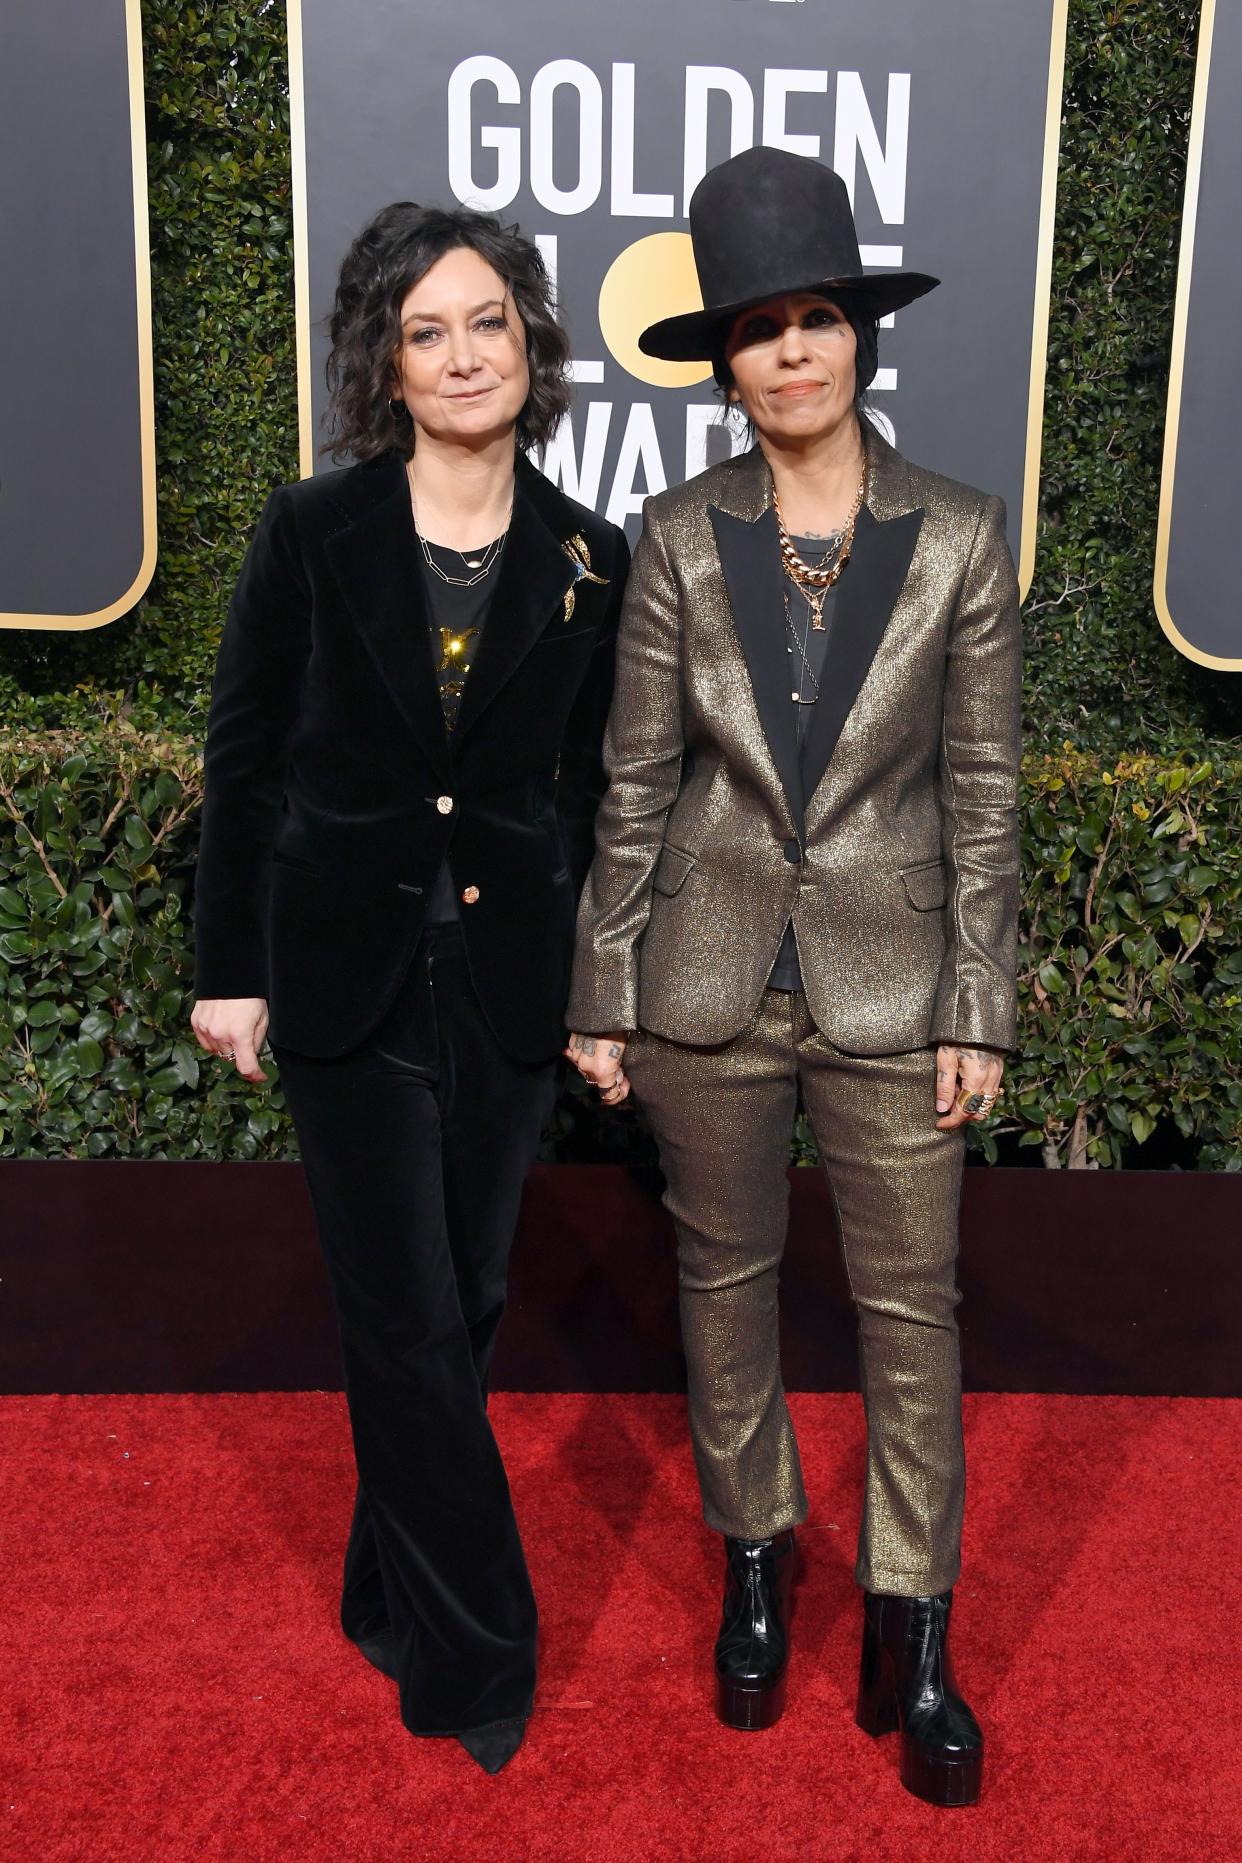 Sara Gilbert (left) and Linda Perry (right) pose on red carpet